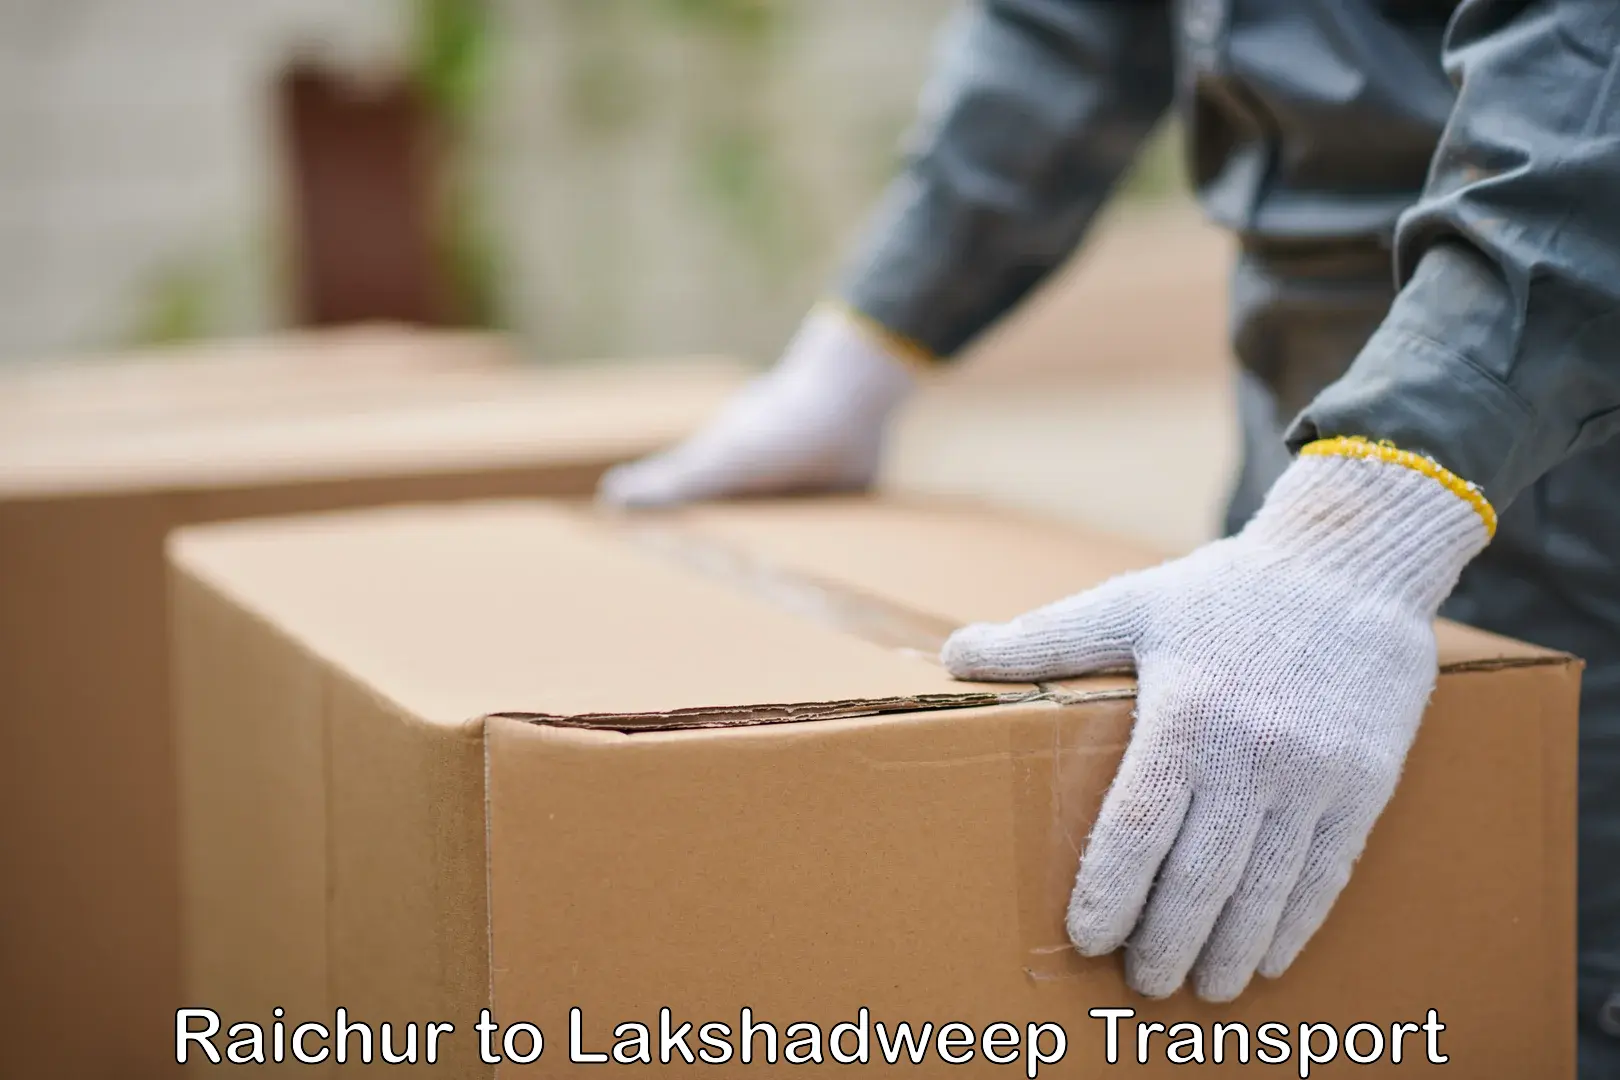 Container transport service Raichur to Lakshadweep